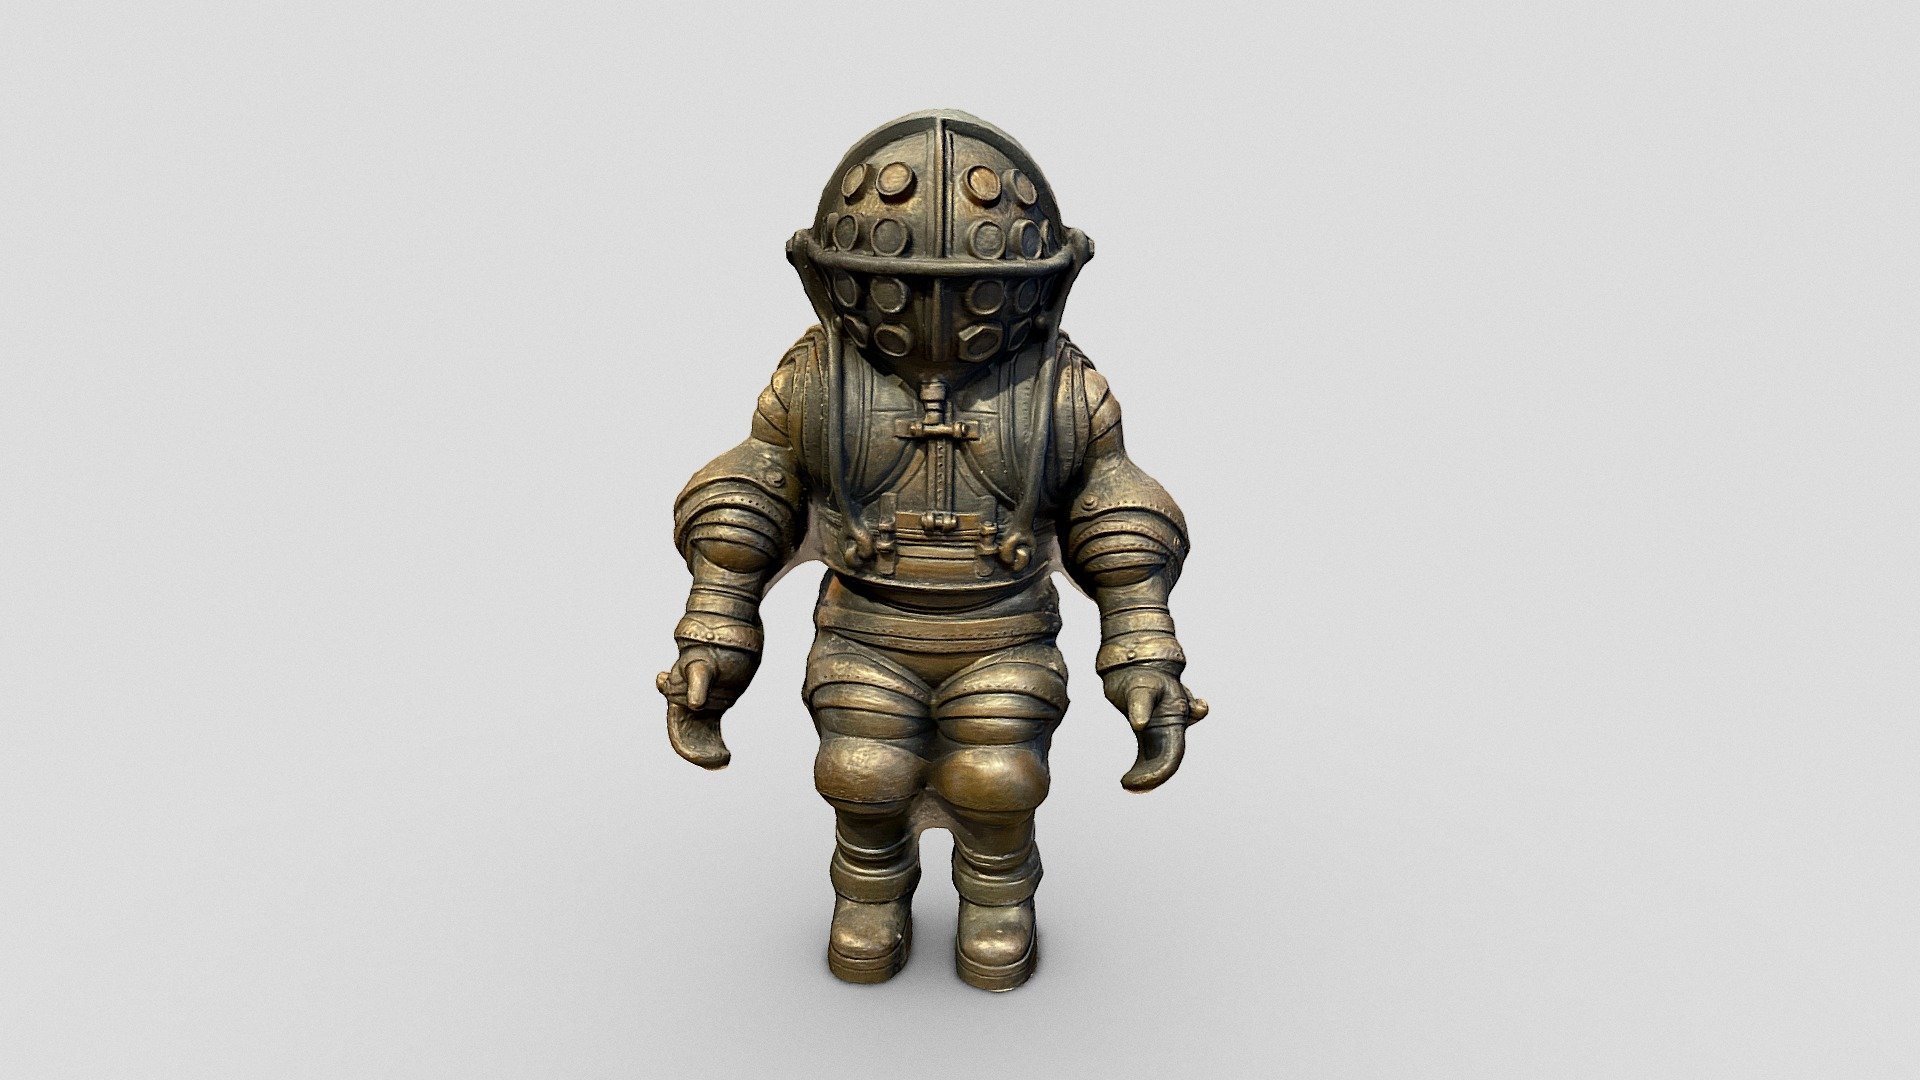 Scanned with Scenario and the iPhone (https://apps.apple.com/us/app/scenario-play-with-reality/id1590029370) - Capture 3D models, build 3D scenes and connect with other creators, all from your phone.

Early diving suit (1878) by the Carmagnolle brothers. The suit was the first truly anthropomorphic suit design to be constructed.

Two French inventors, brothers Alphonse and Theodore Carmagnolle of Marseille, France, were granted a patent for an armored diving dress in 1882 (Filed 1878). The 22 joints were made of partial sections of concentric spheres formed to create a close fit.

This is a 5 inch model&hellip;
Mixamo animation: https://skfb.ly/ooJYo

Please feel free to follow my collections of daily scans (link) as well as my scans in San Francisco, Paris, or in the catacombs (link). Follow me on Twitter

 - Day 196: Early diving suit (1878) - 1scanaday - Download Free 3D model by Emm (@edemaistre) 3d model